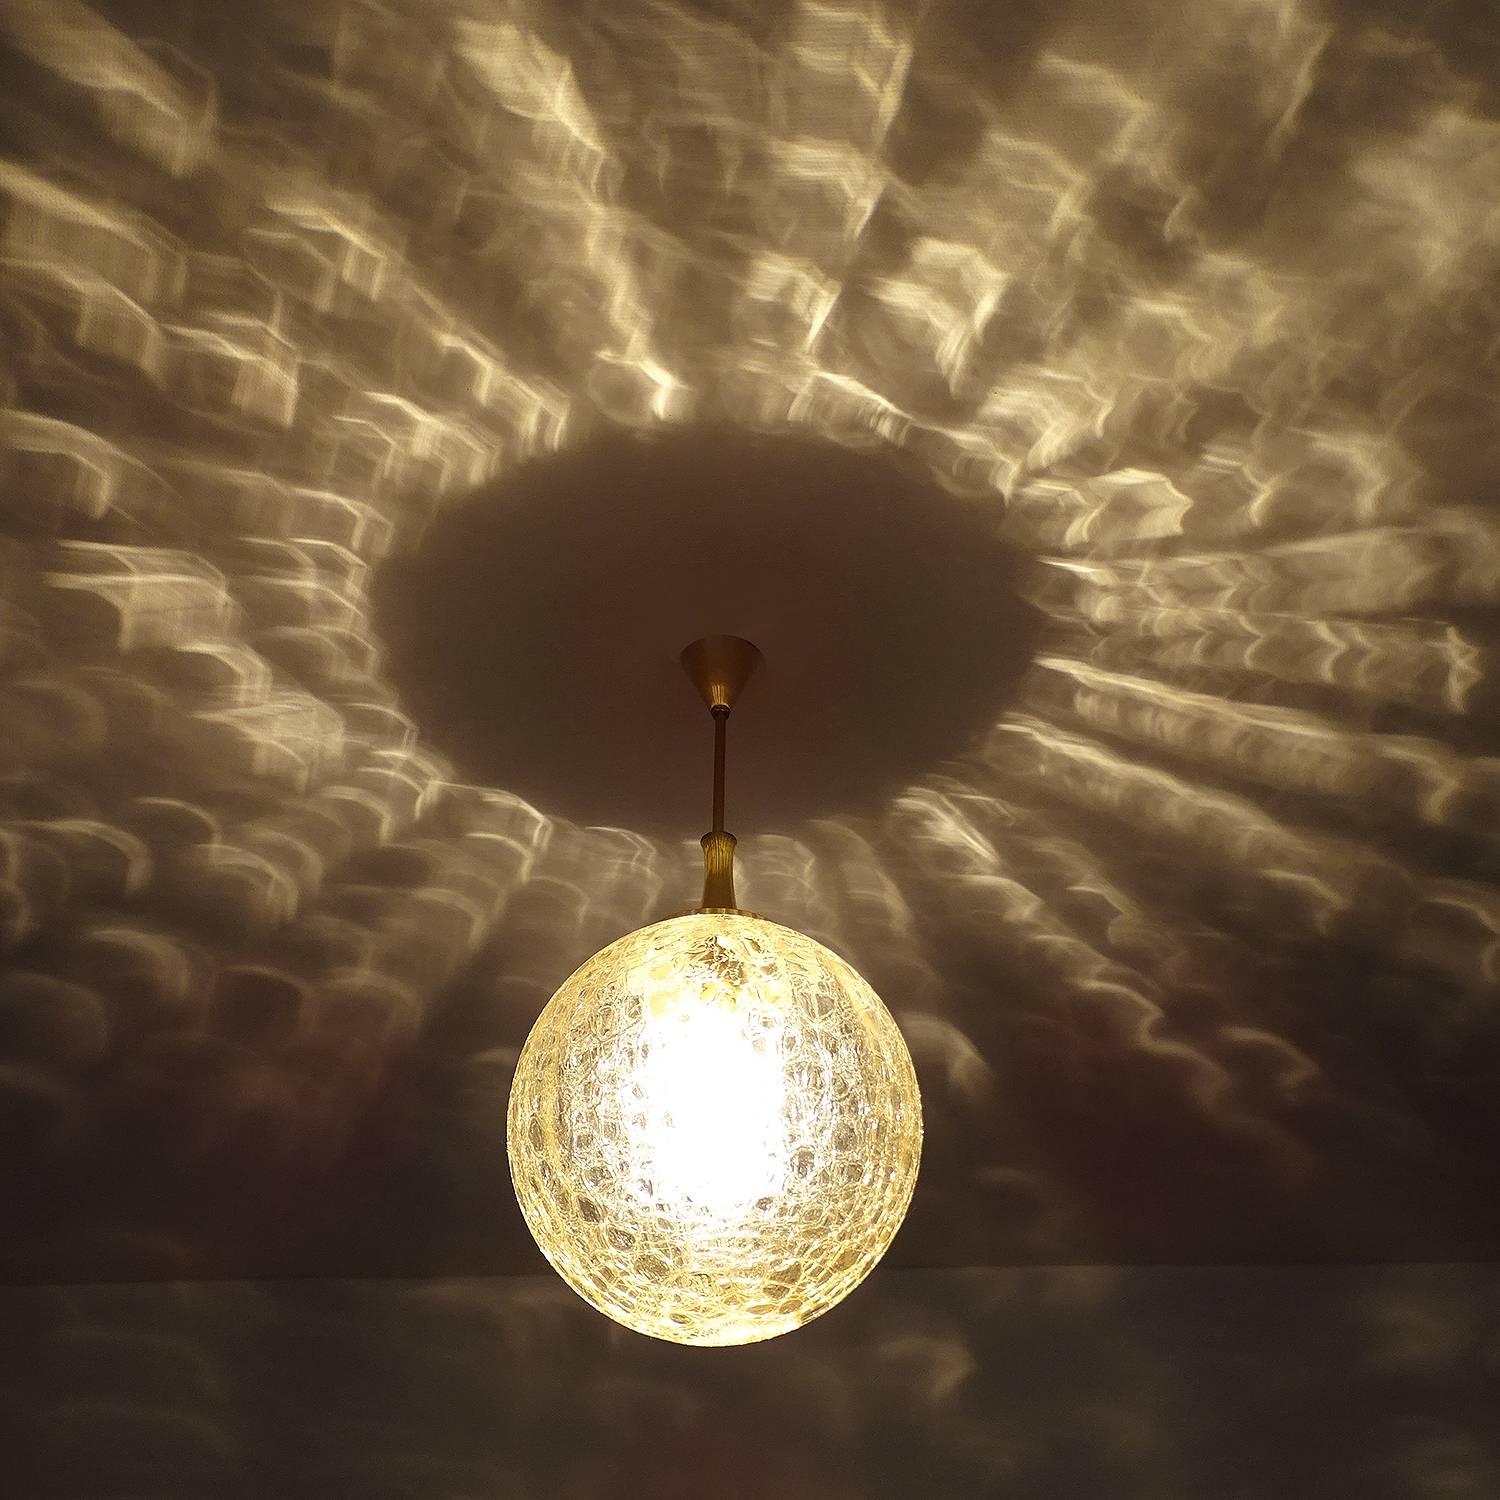 Large mid century modern Doria pendant light with a signature handblown structured glass shade (Doria called this pattern crocodile skin).  Great lighting effect.
25.59 in. / 65 cm H
Diameter
11.81 in. (30 cm)
One standard size bulb up to 100